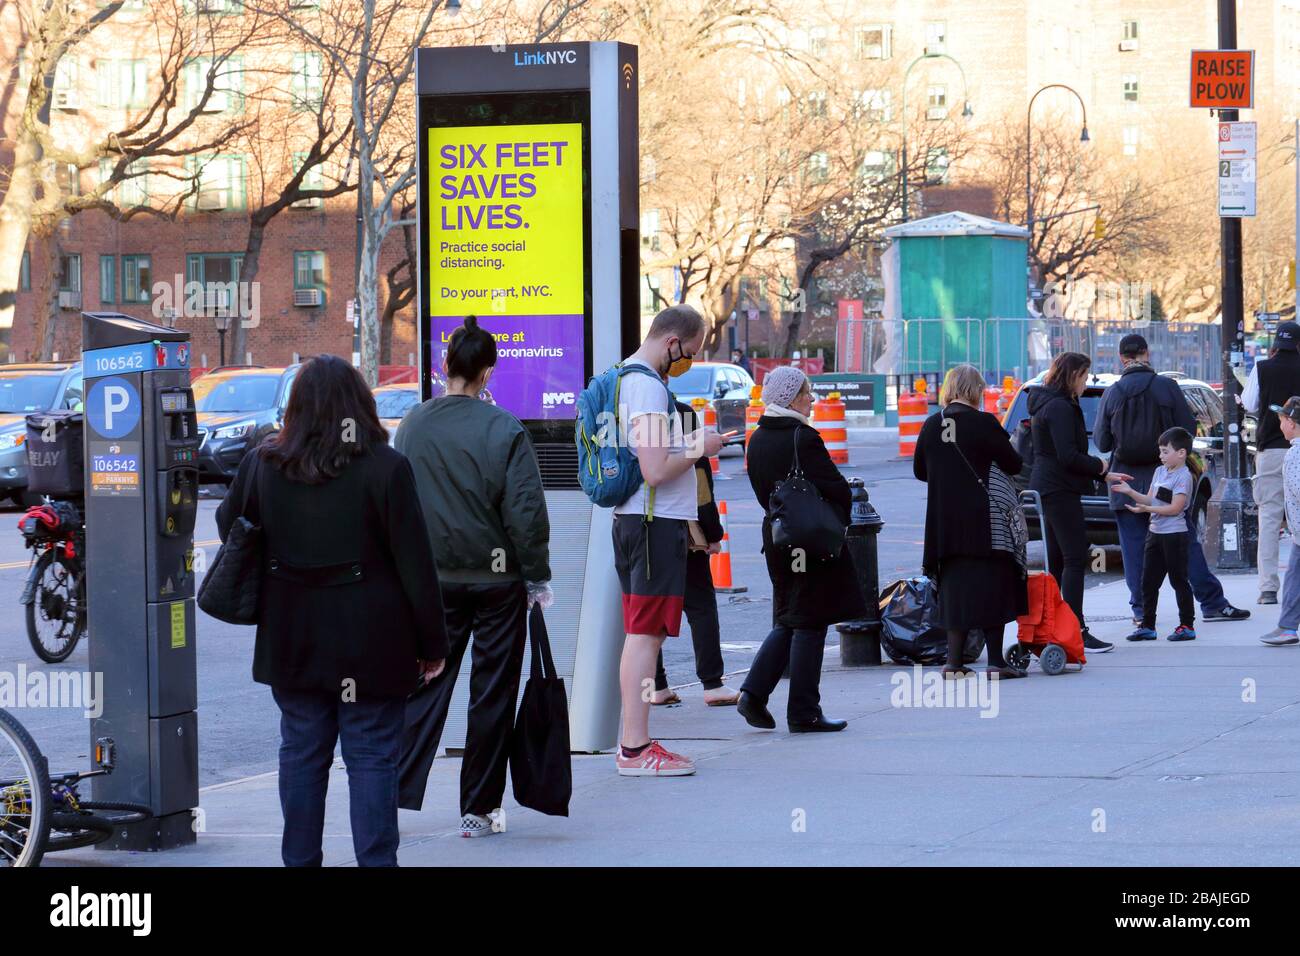 New York, NY, 27th March 2020. New Yorkers practicing social distancing as they queue to enter a supermarket... SEE MORE INFO FOR FULL CAPTION Stock Photo